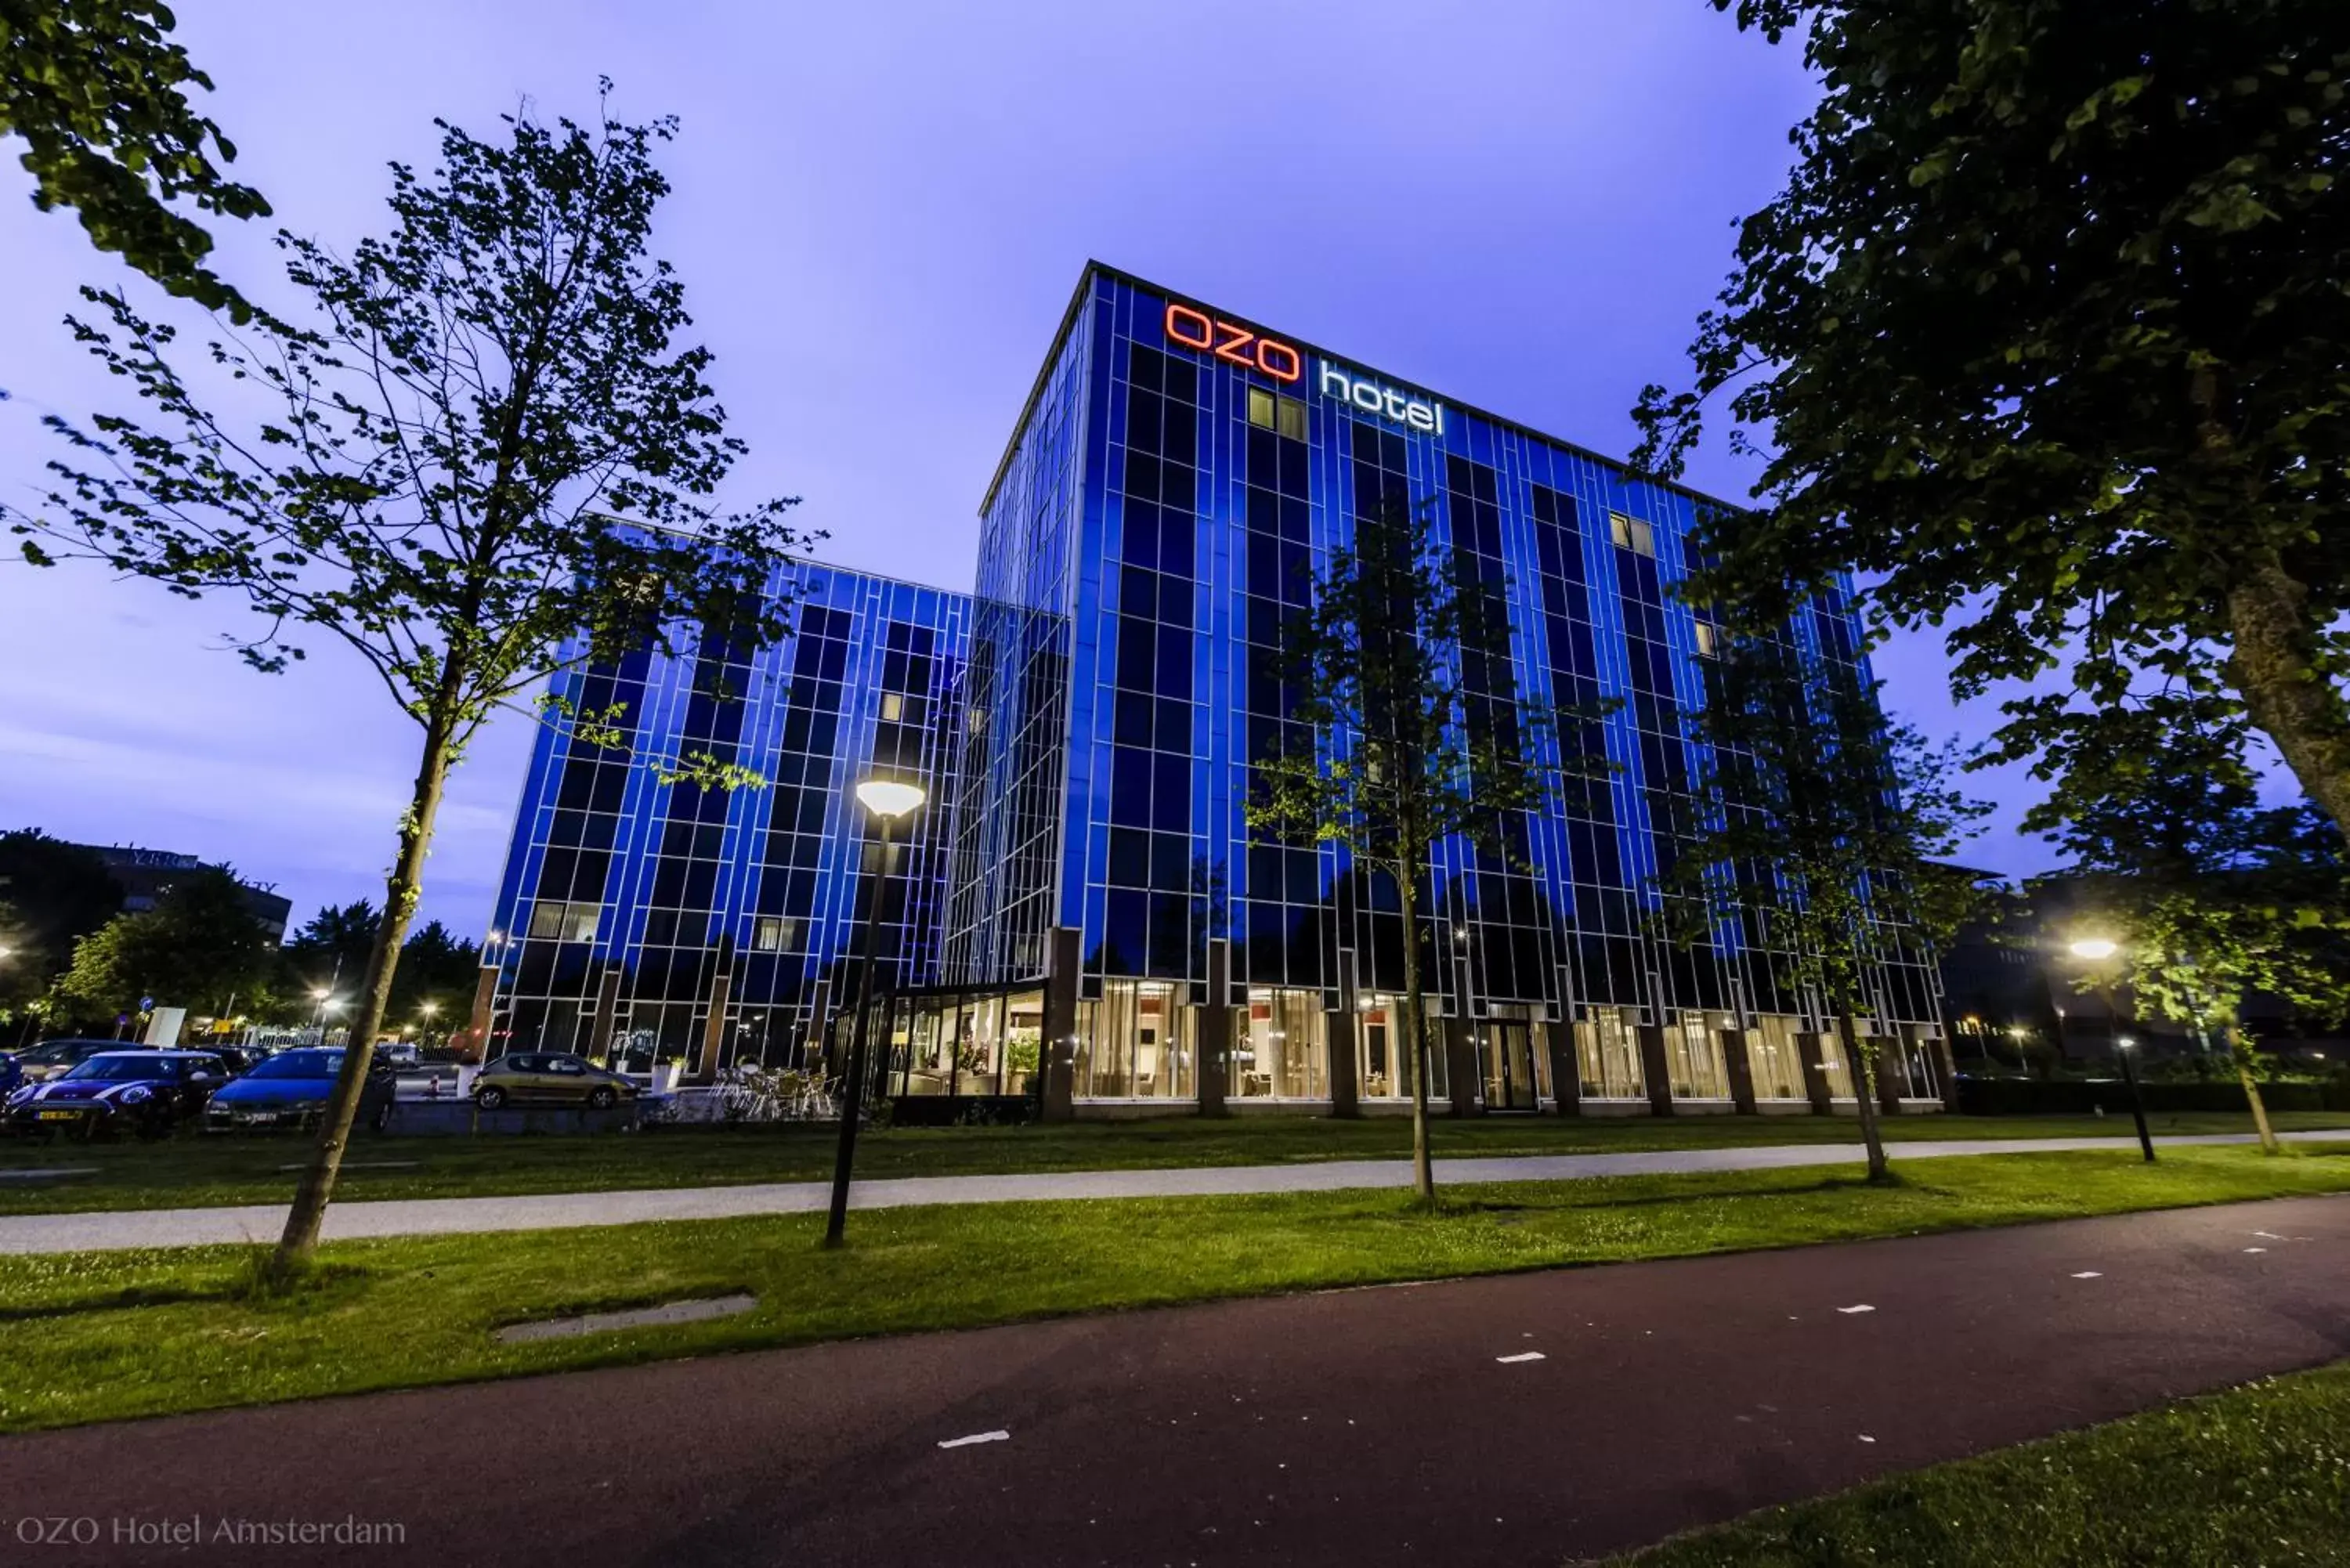 Property building in OZO Hotels Arena Amsterdam